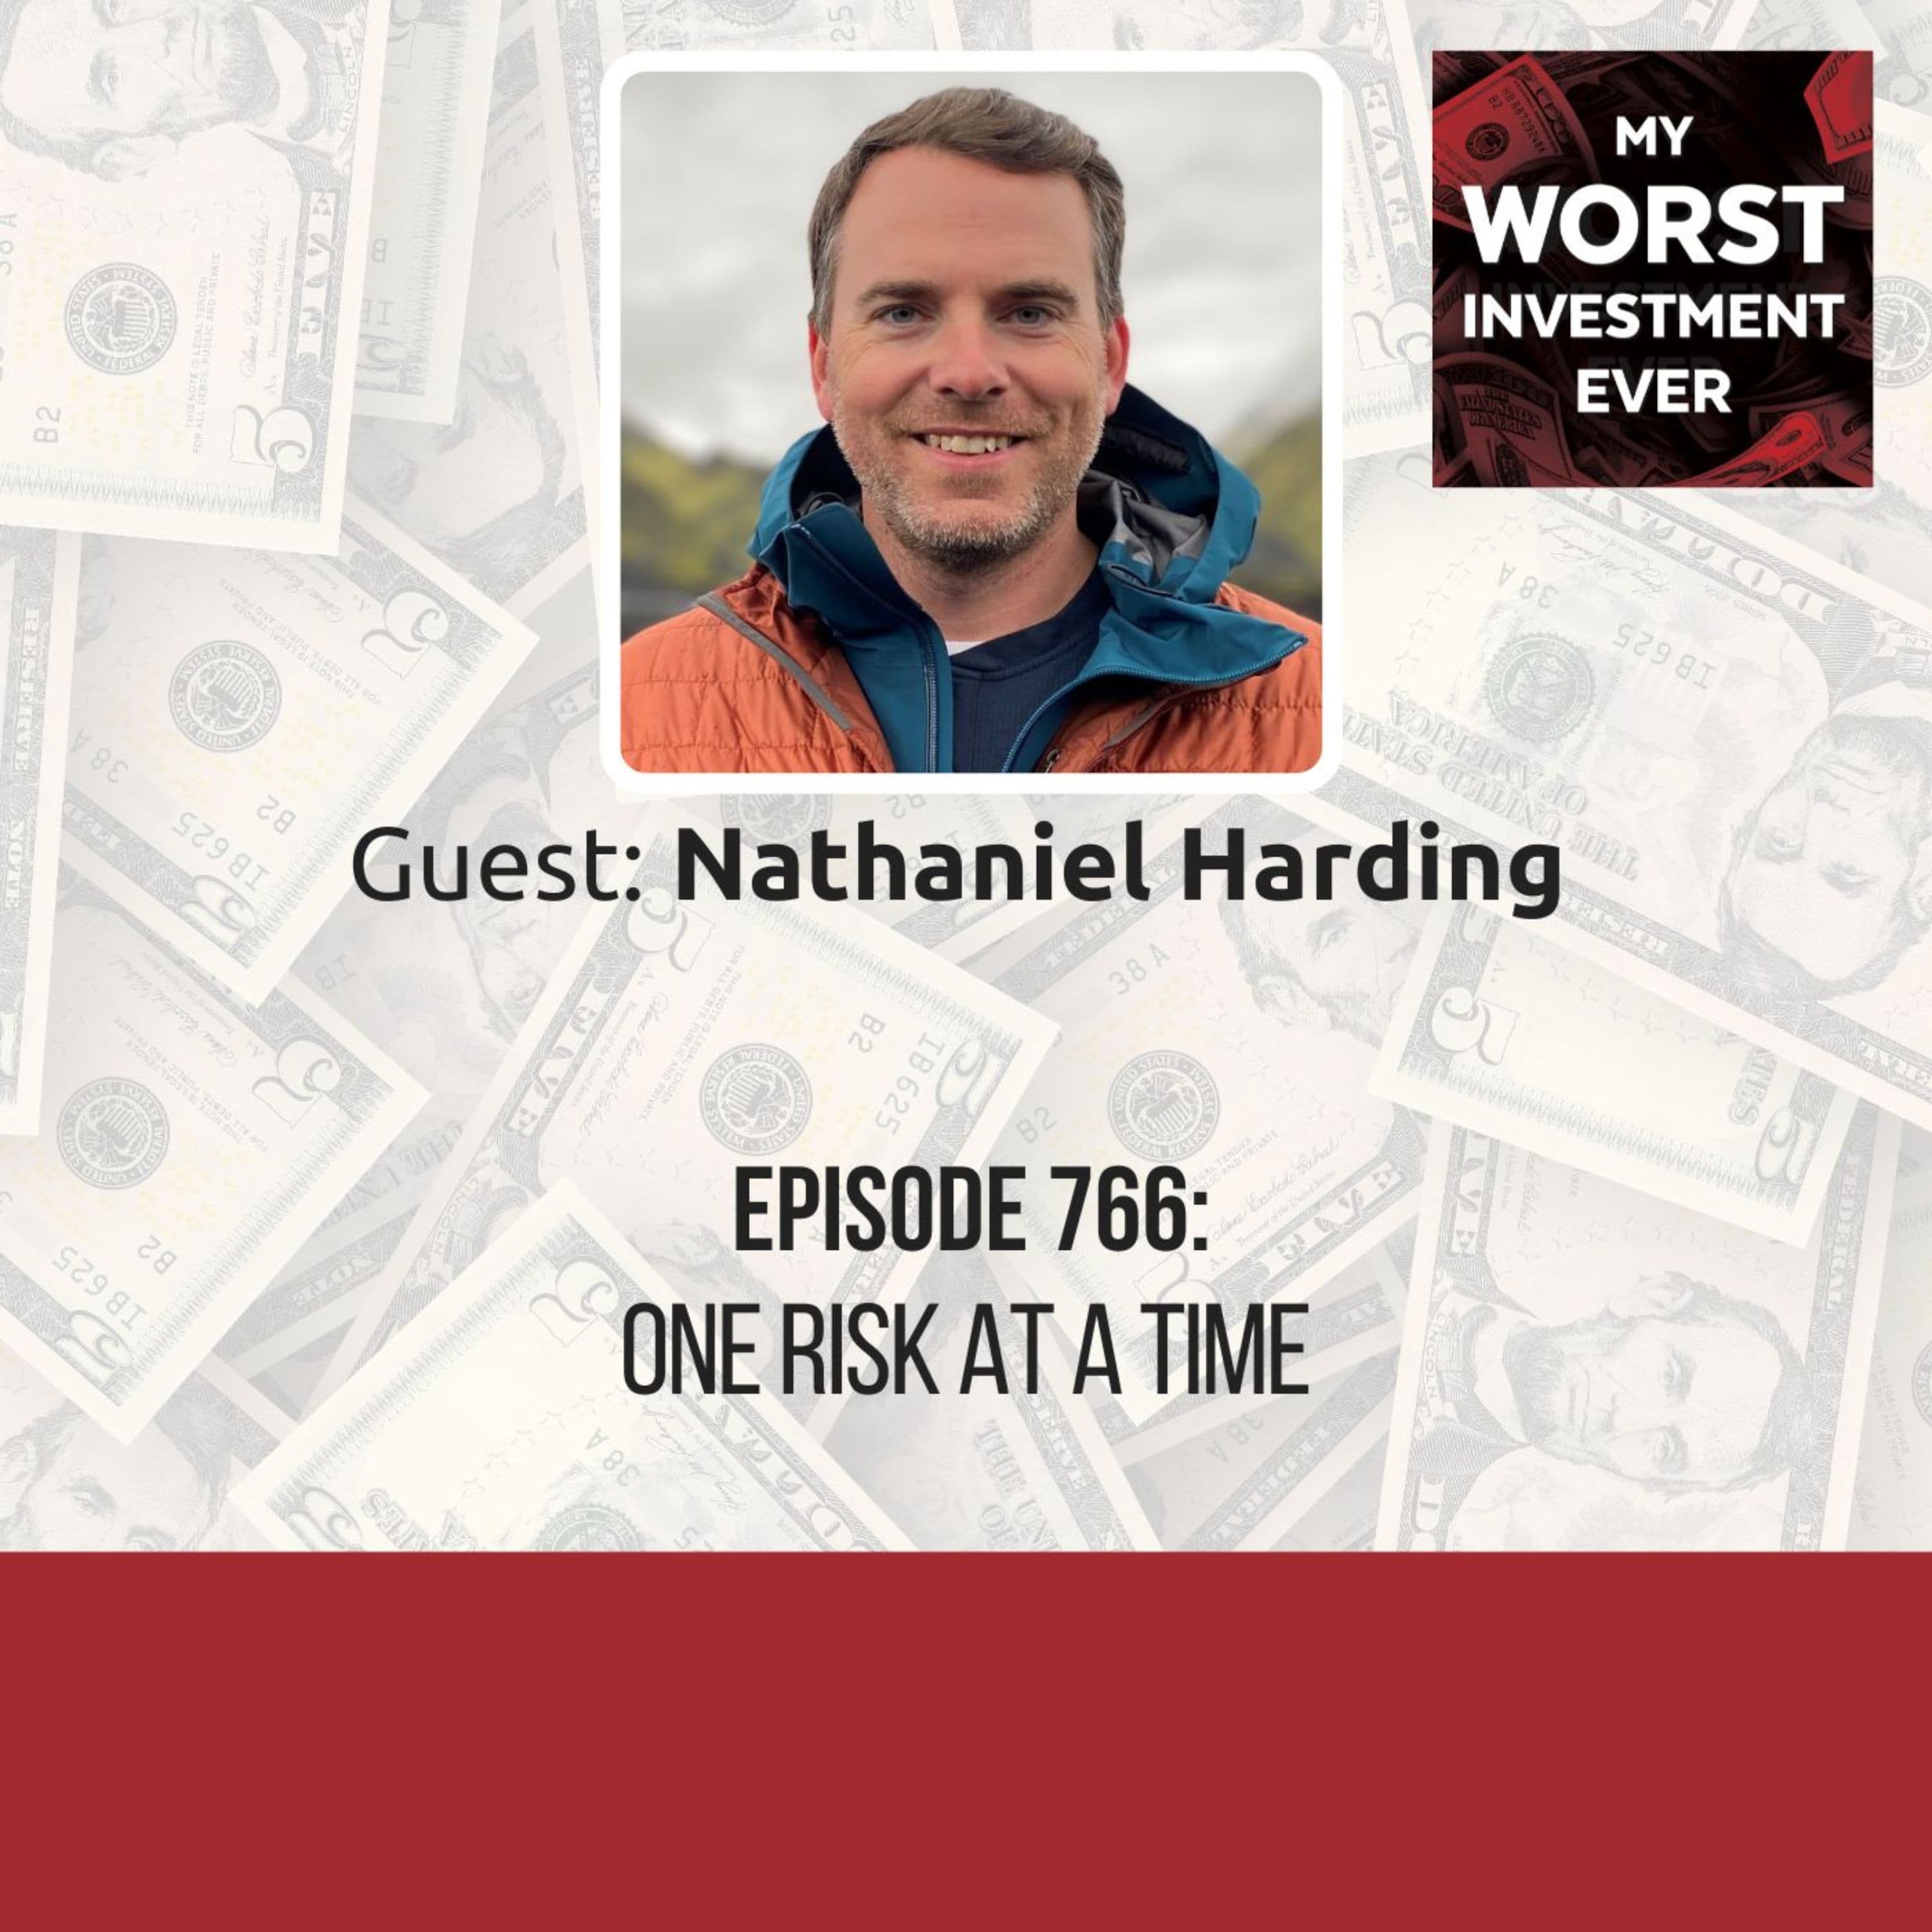 Nathaniel Harding - One Risk at a Time